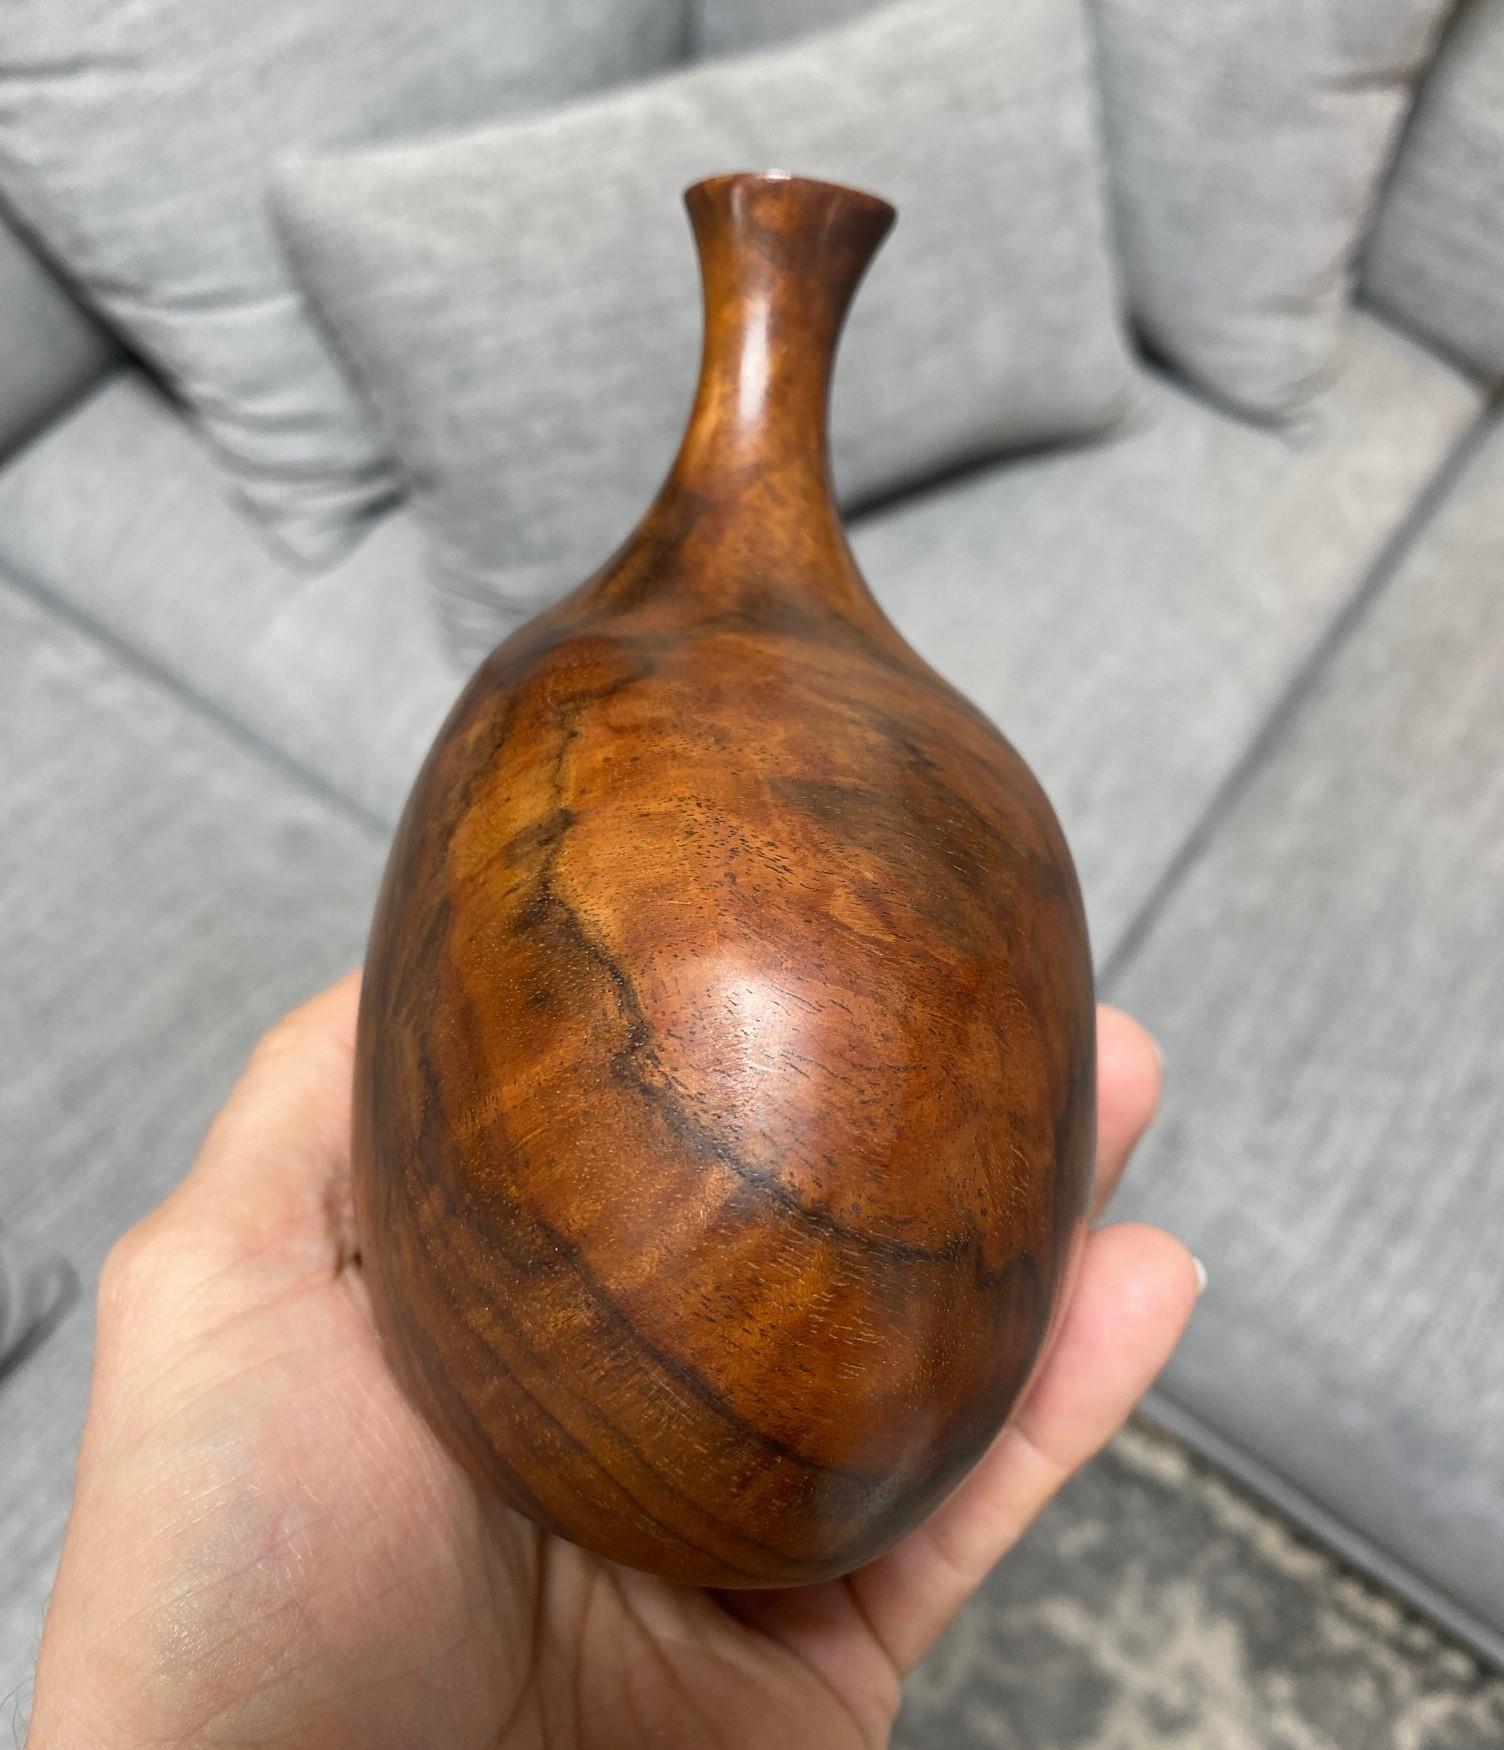 Doug Ayers Signed California Artist Organic Natural Wood Turned Weed Vase Vessel For Sale 4